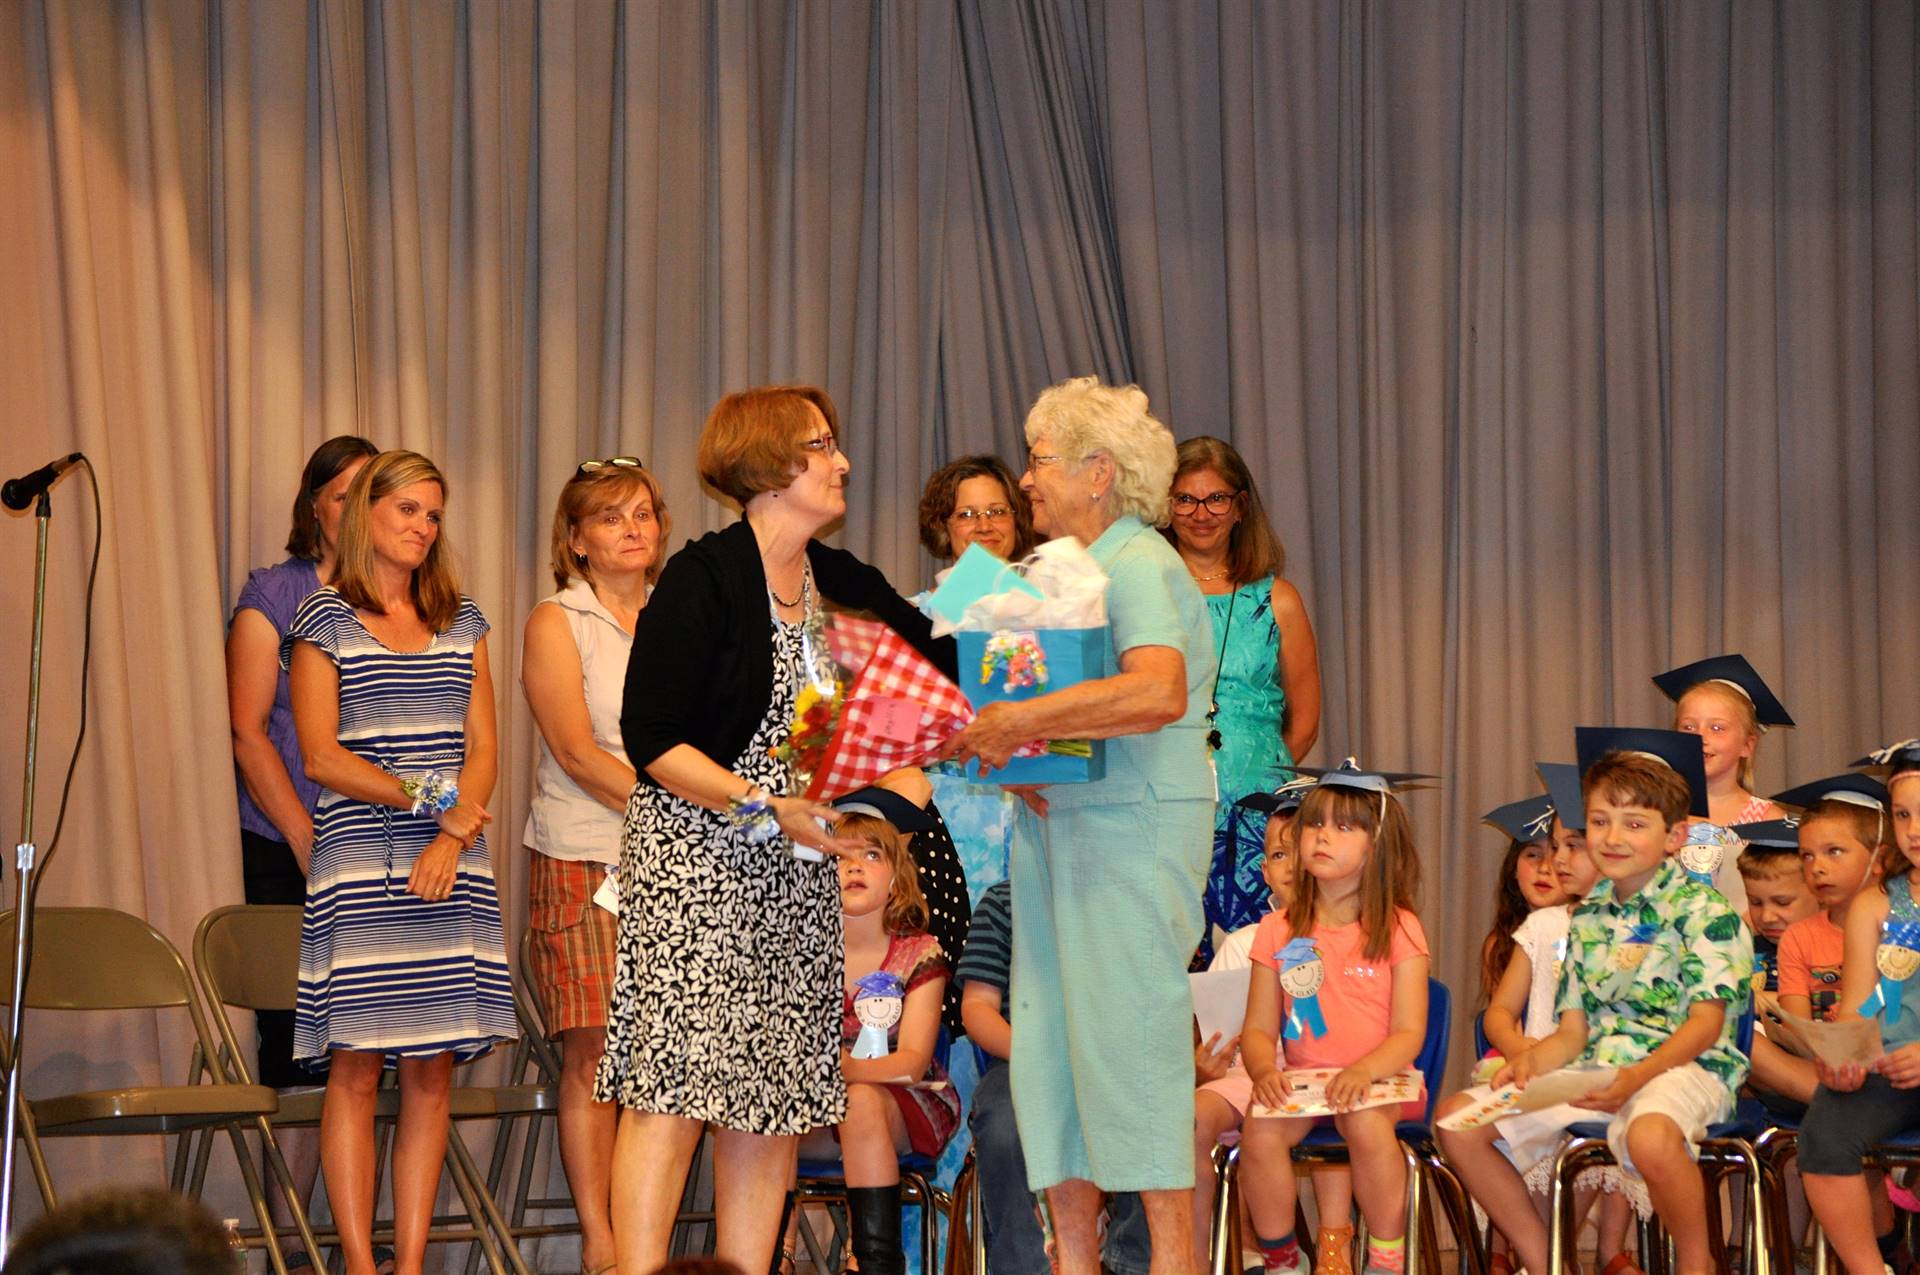 Mrs. Ives receives a gift on stage as students and staff watch.